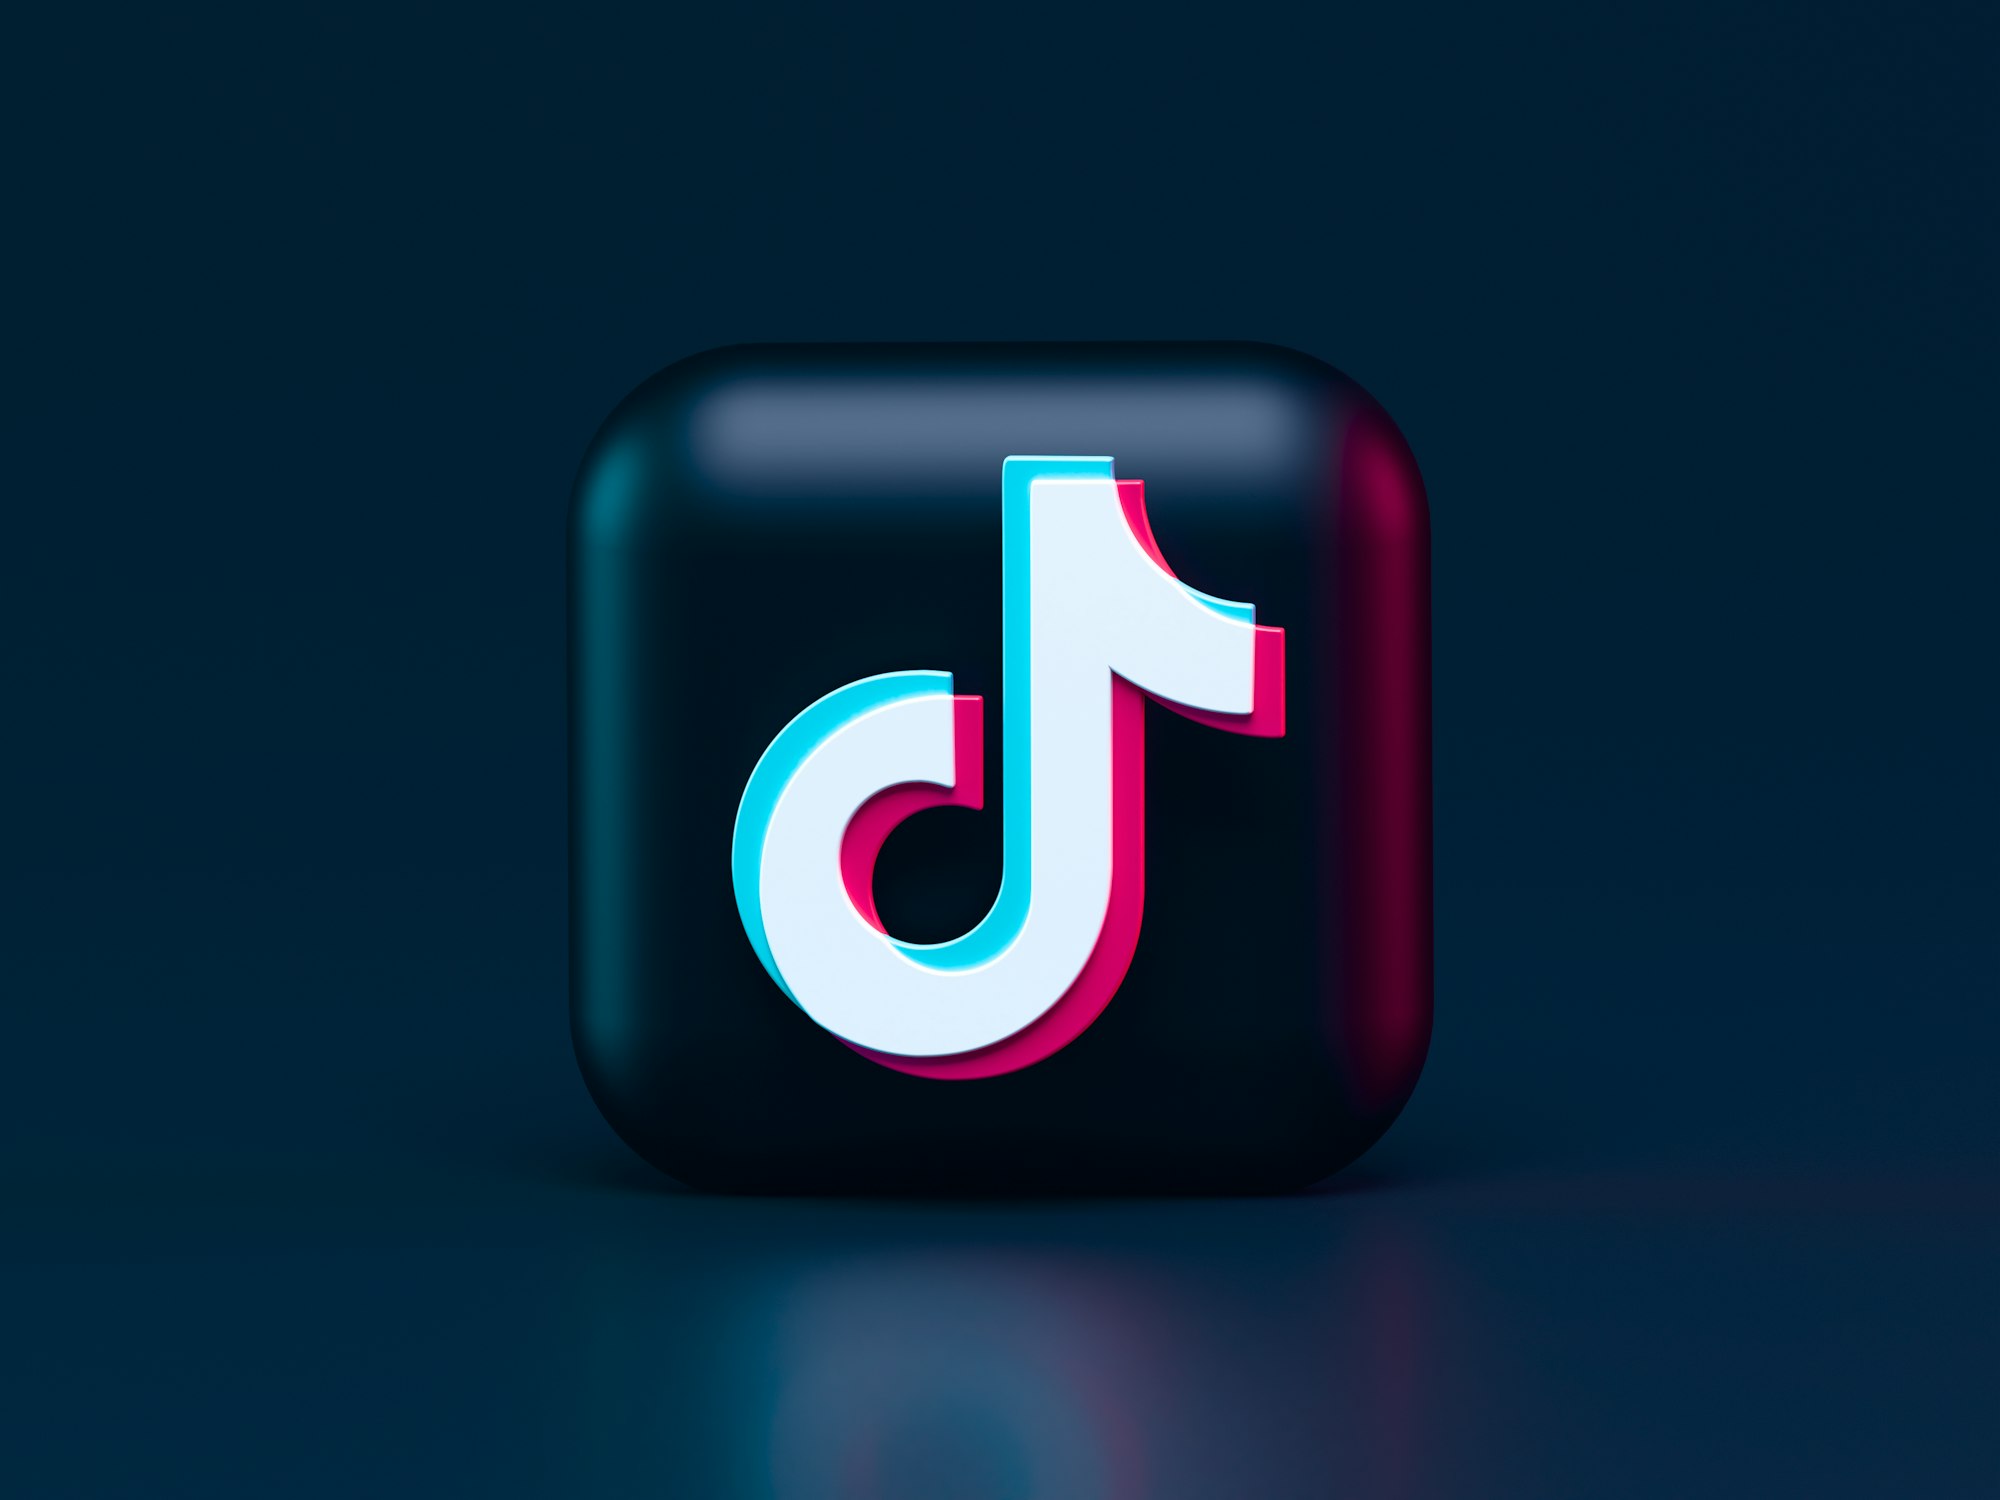 TikTok becomes 2nd non-game app to surpass $6 billion in all-time consumer spending